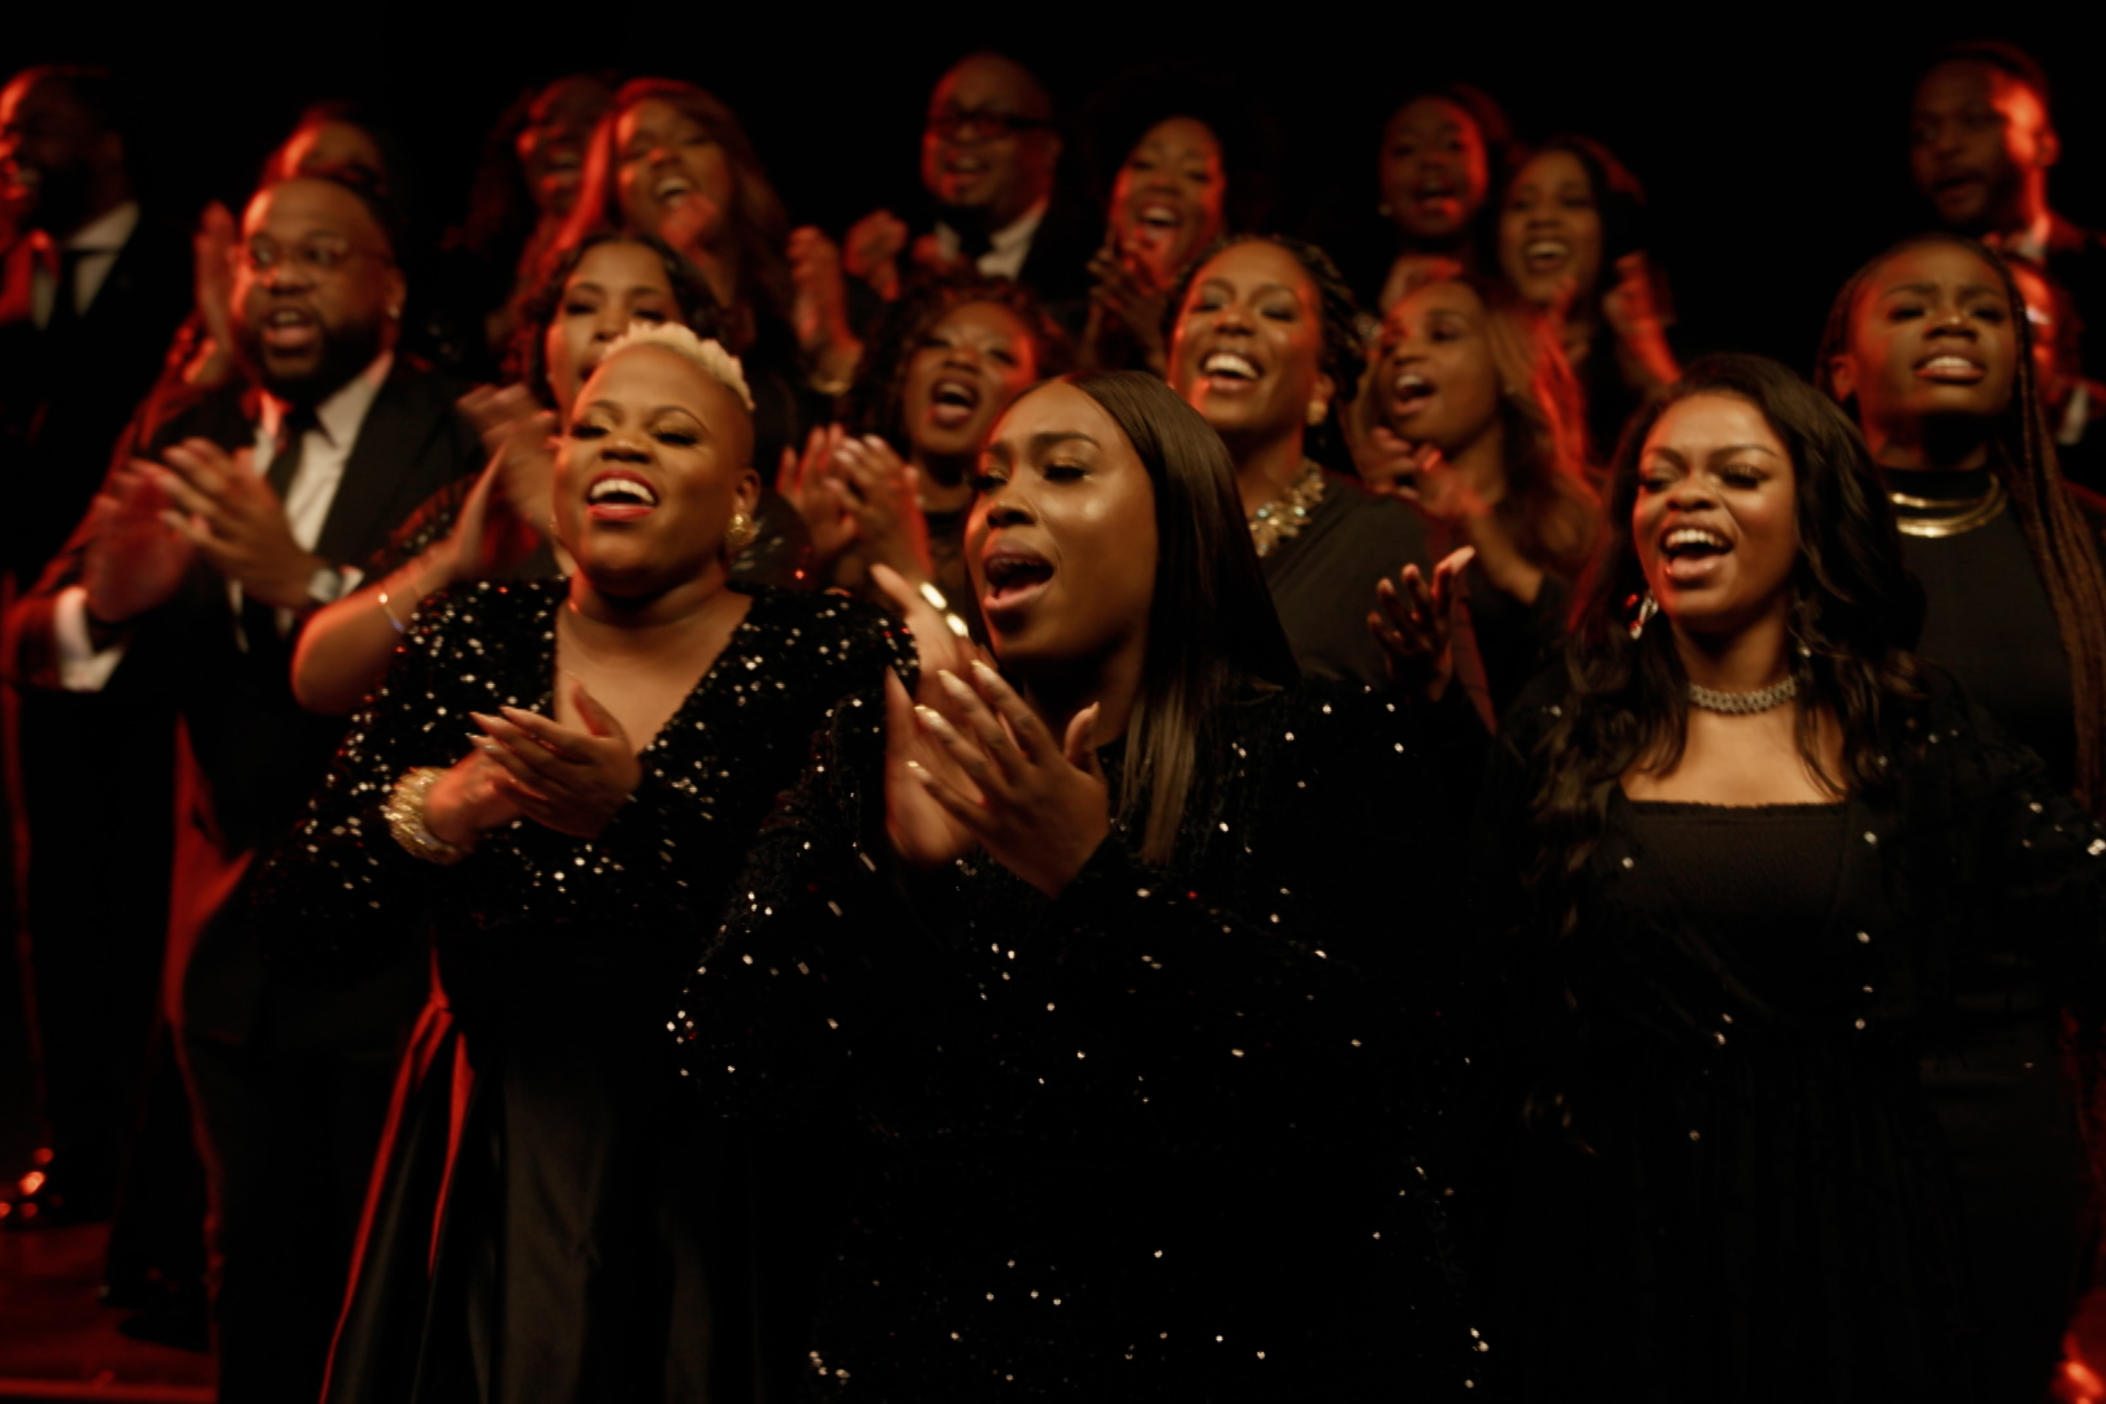 Tyrell Bell and the Belle Singers, featuring Ian Johnson, perform "Can't Nobody Do Me Like Jesus", for GOSPEL.